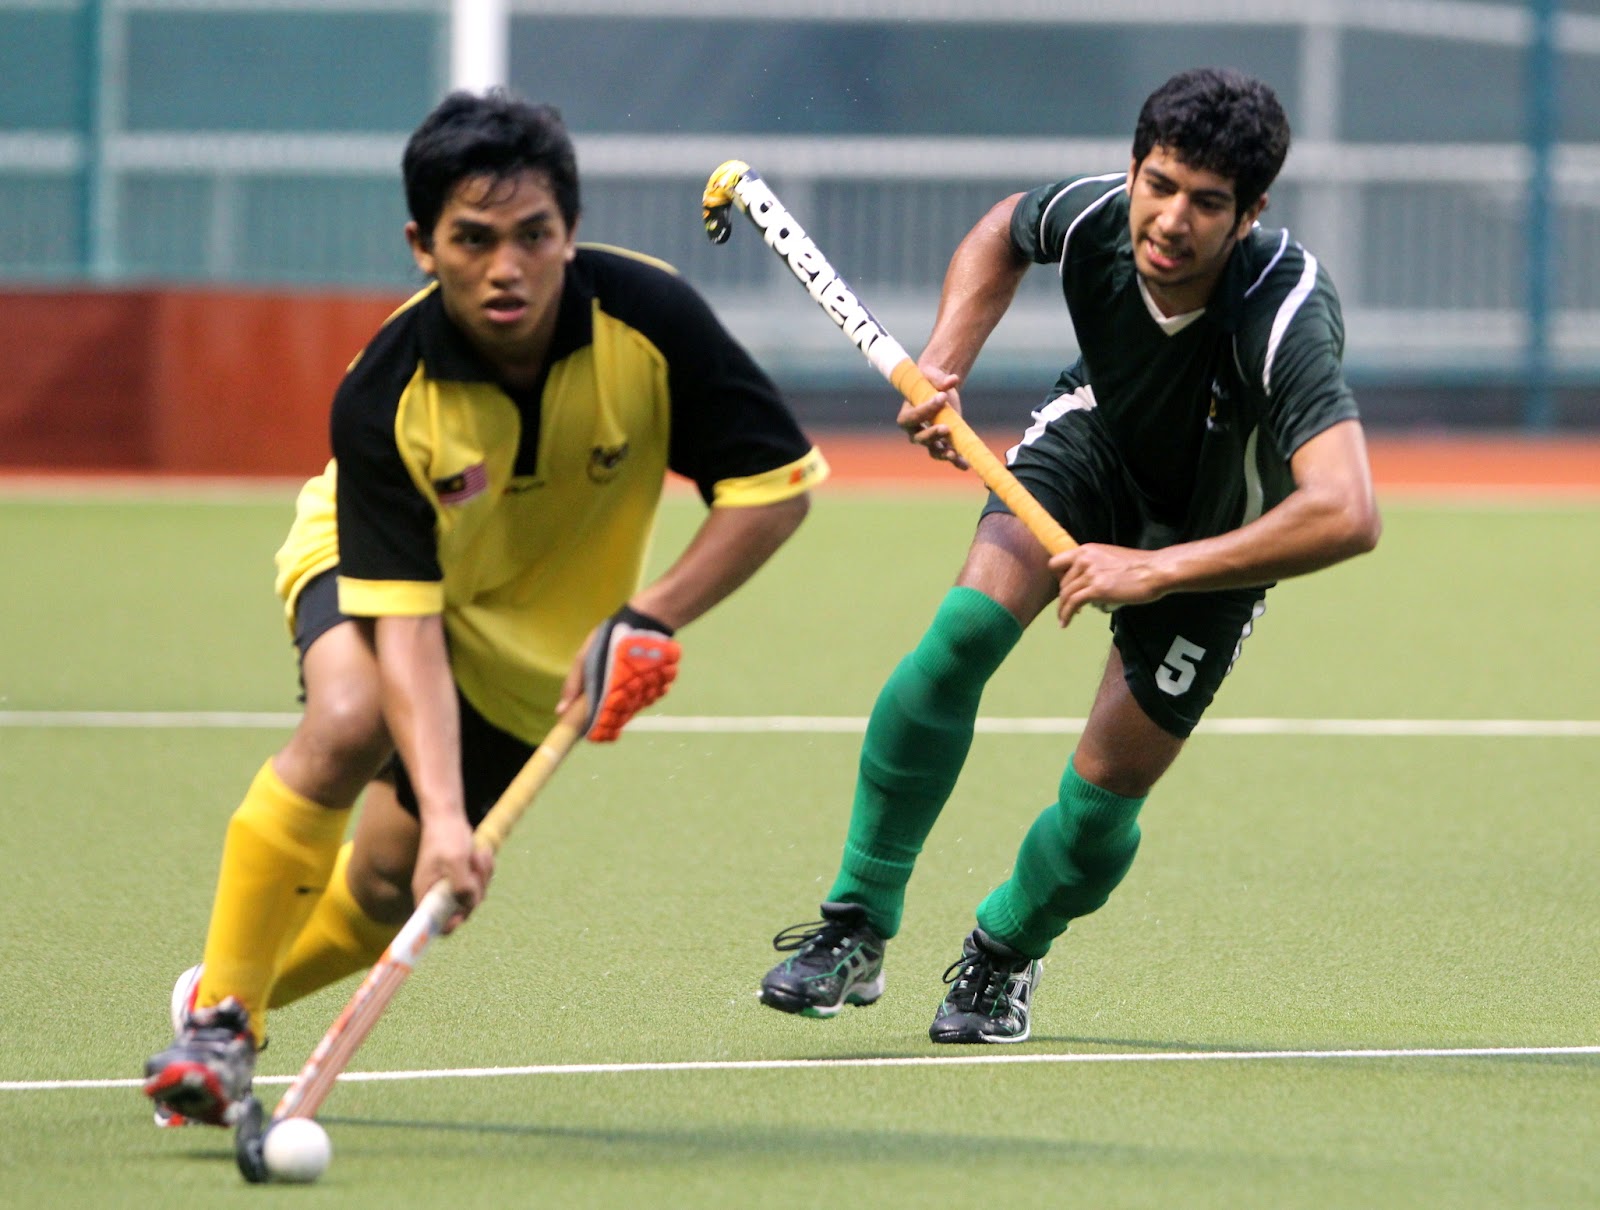 MALAYSIAN SPORTS: JUNIOR ASIA CUP PREVIEW